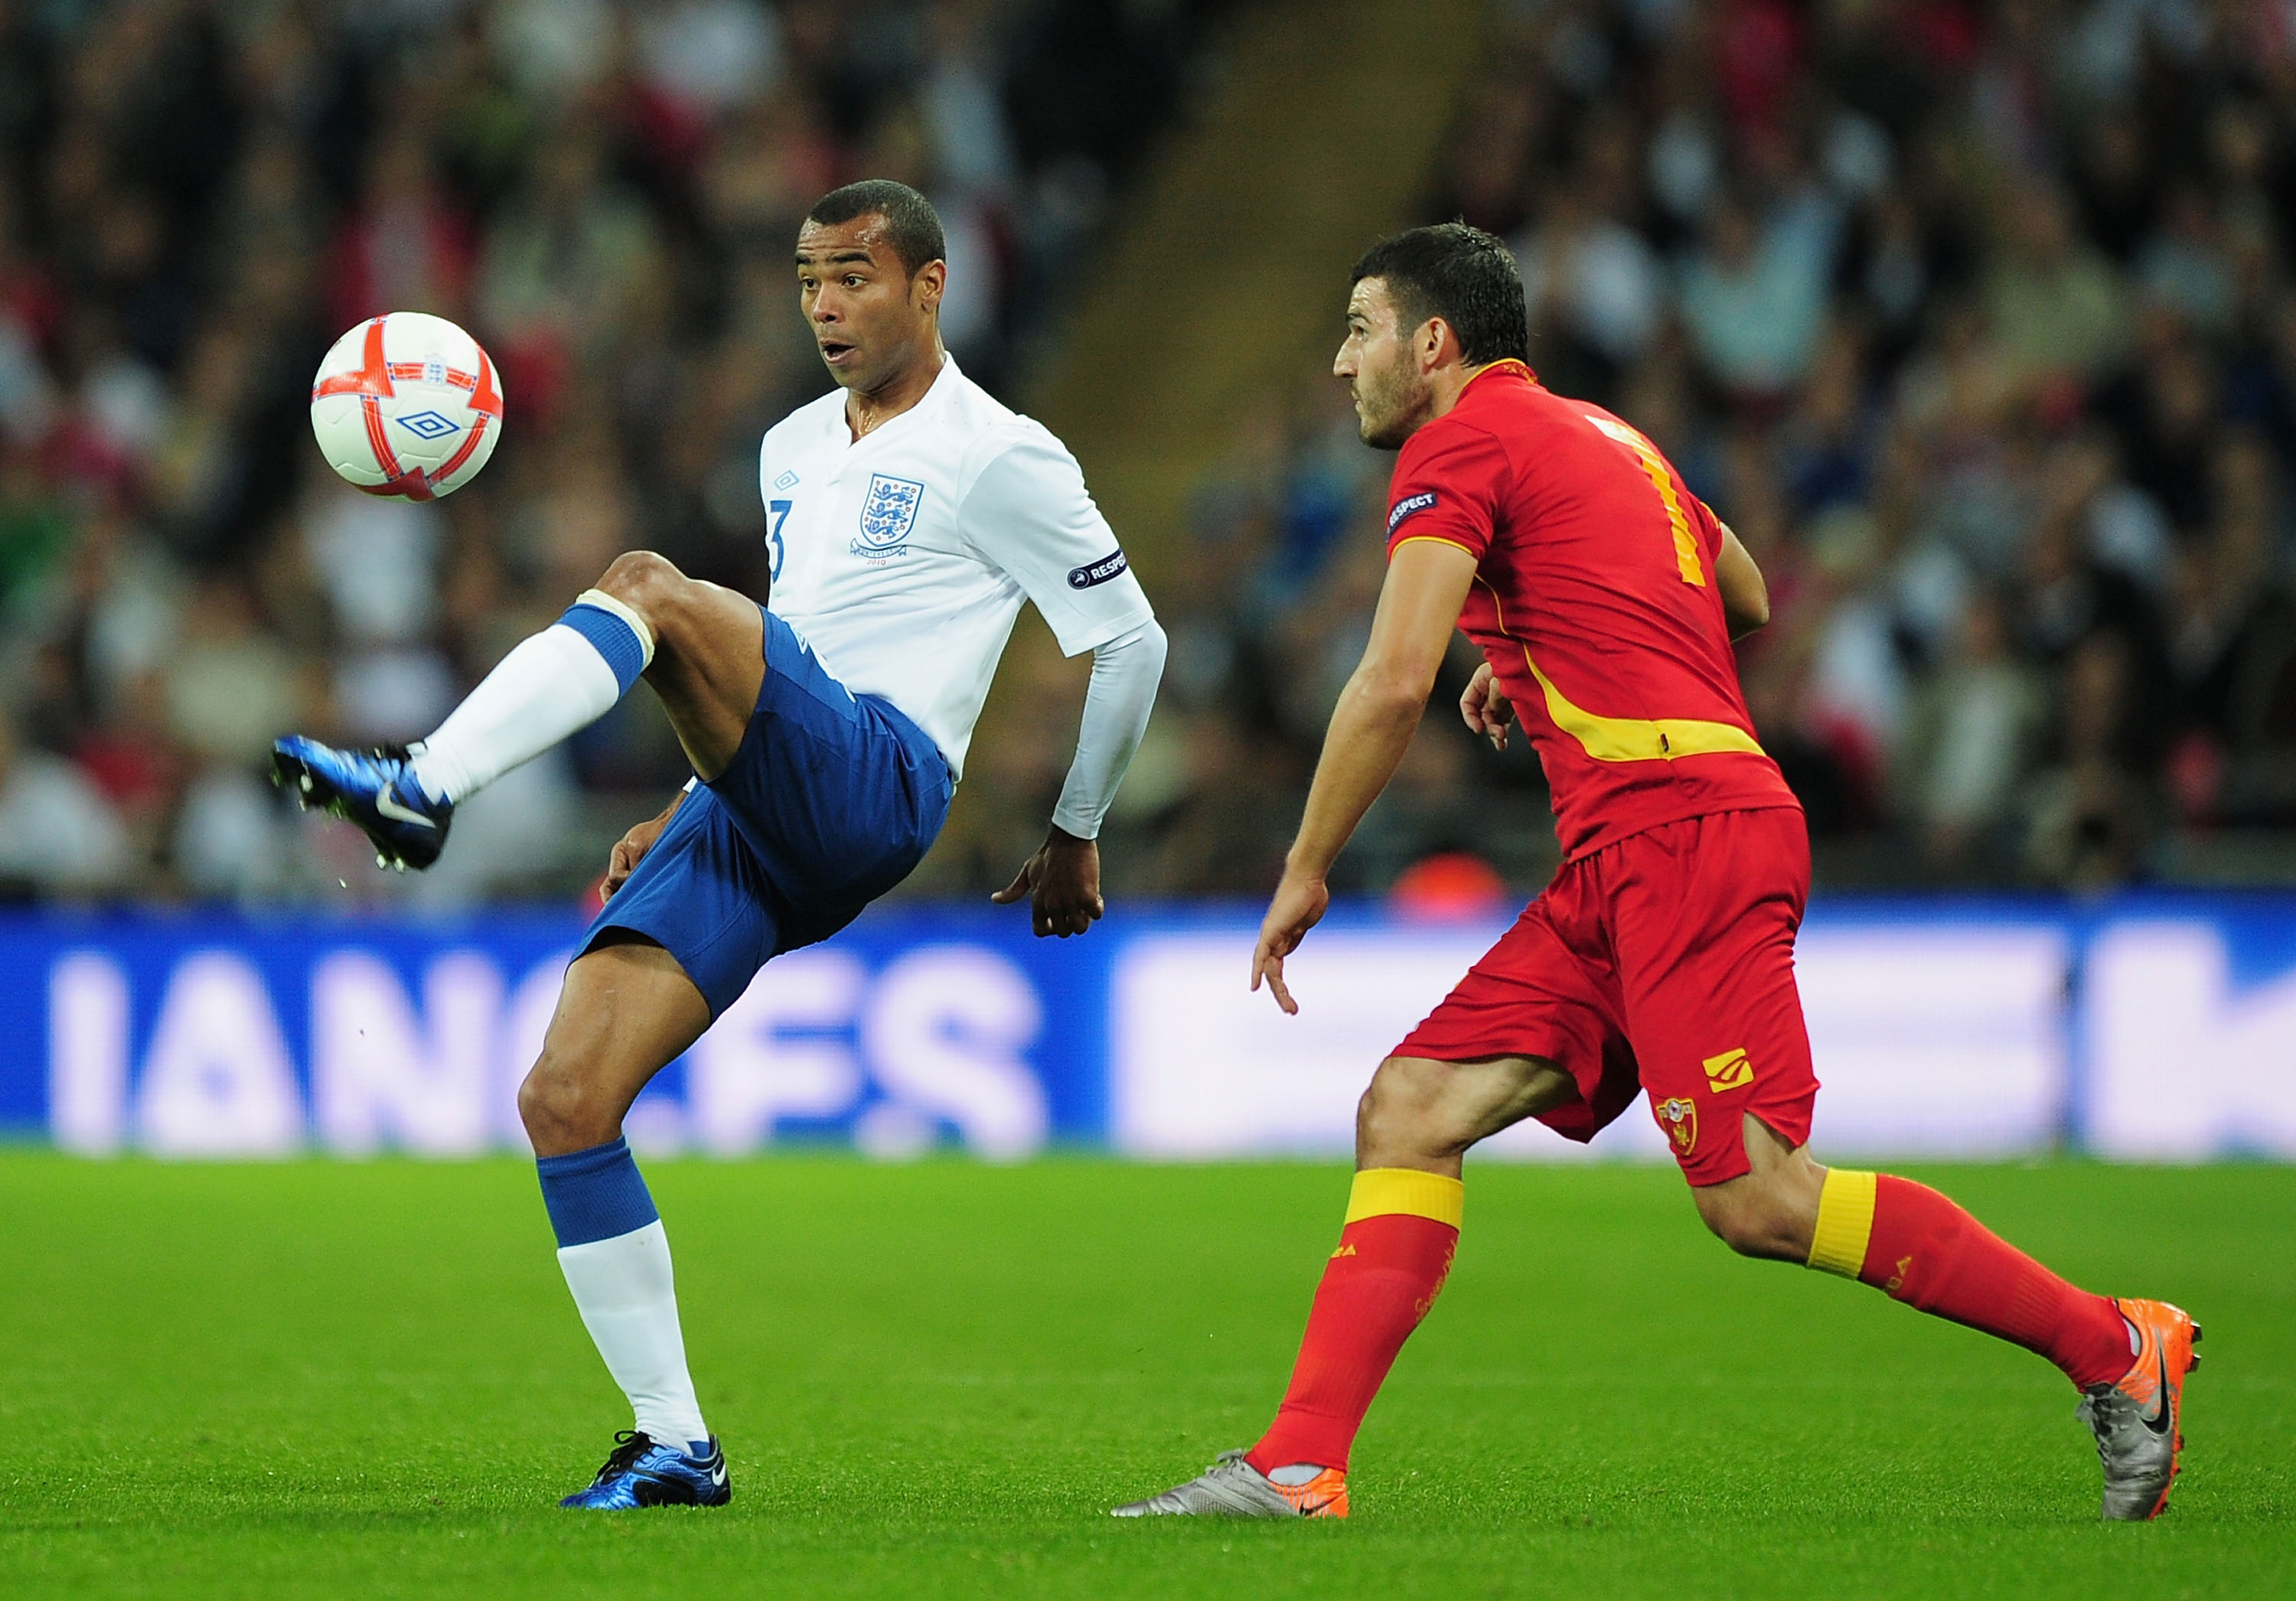 LONDON, ENGLAND - OCTOBER 12: Ashley Cole of England and Simon Vukcevic of Montenegro during the UEFA EURO 2012 Group G Qualifying match between England and Montenegro at Wembley Stadium on October 12, 2010 in London, England.  (Photo by Shaun Botterill/G